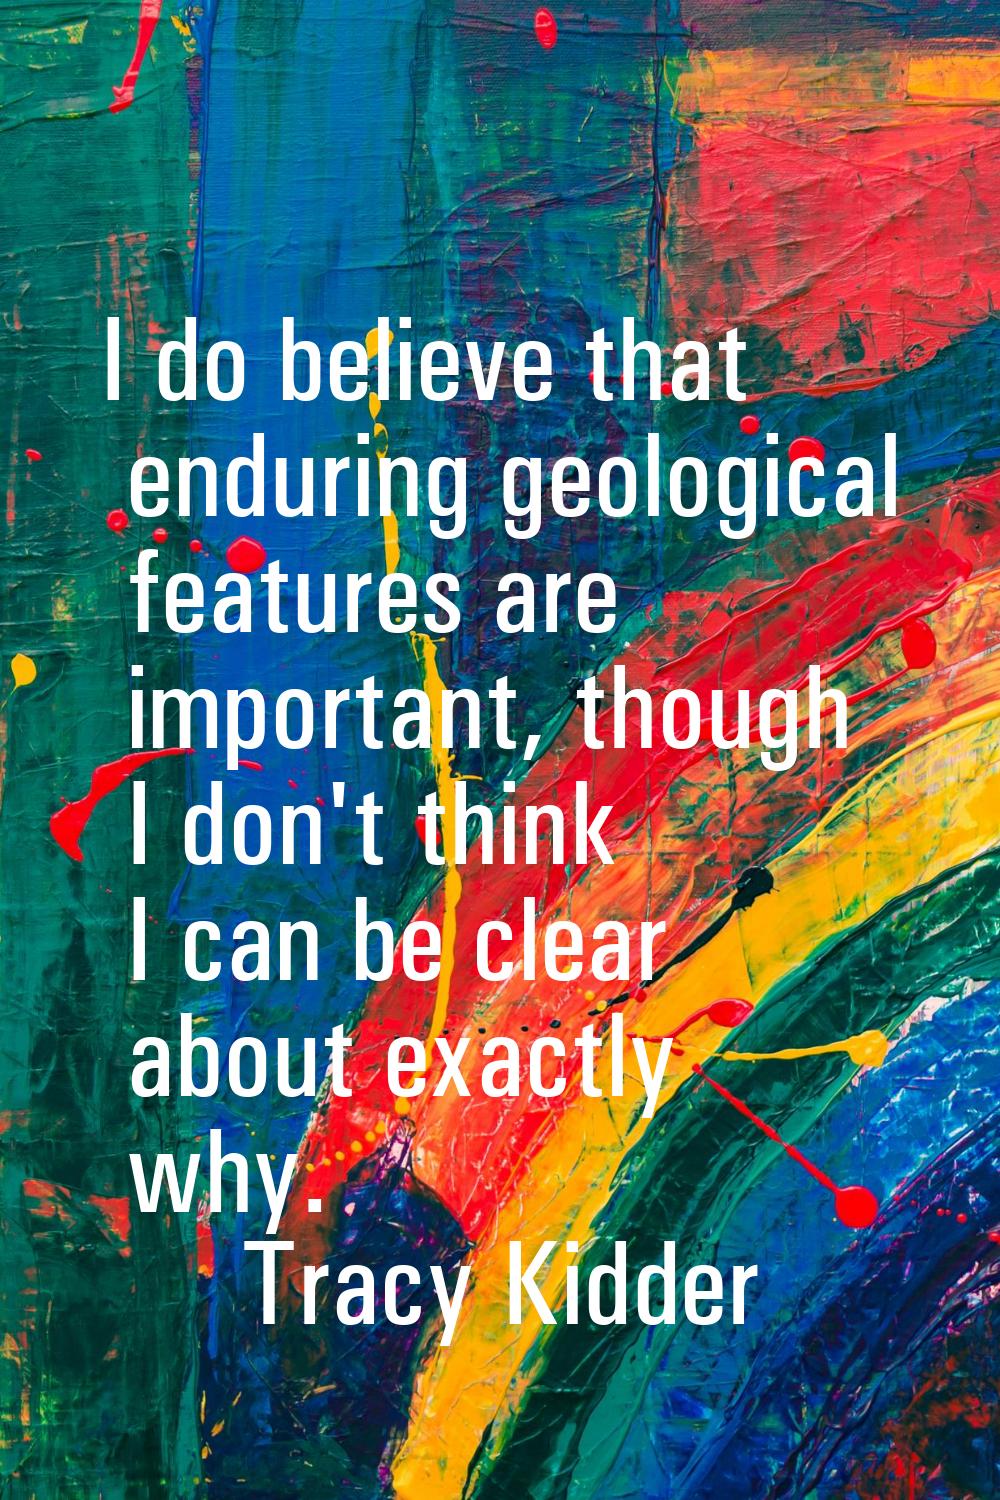 I do believe that enduring geological features are important, though I don't think I can be clear a